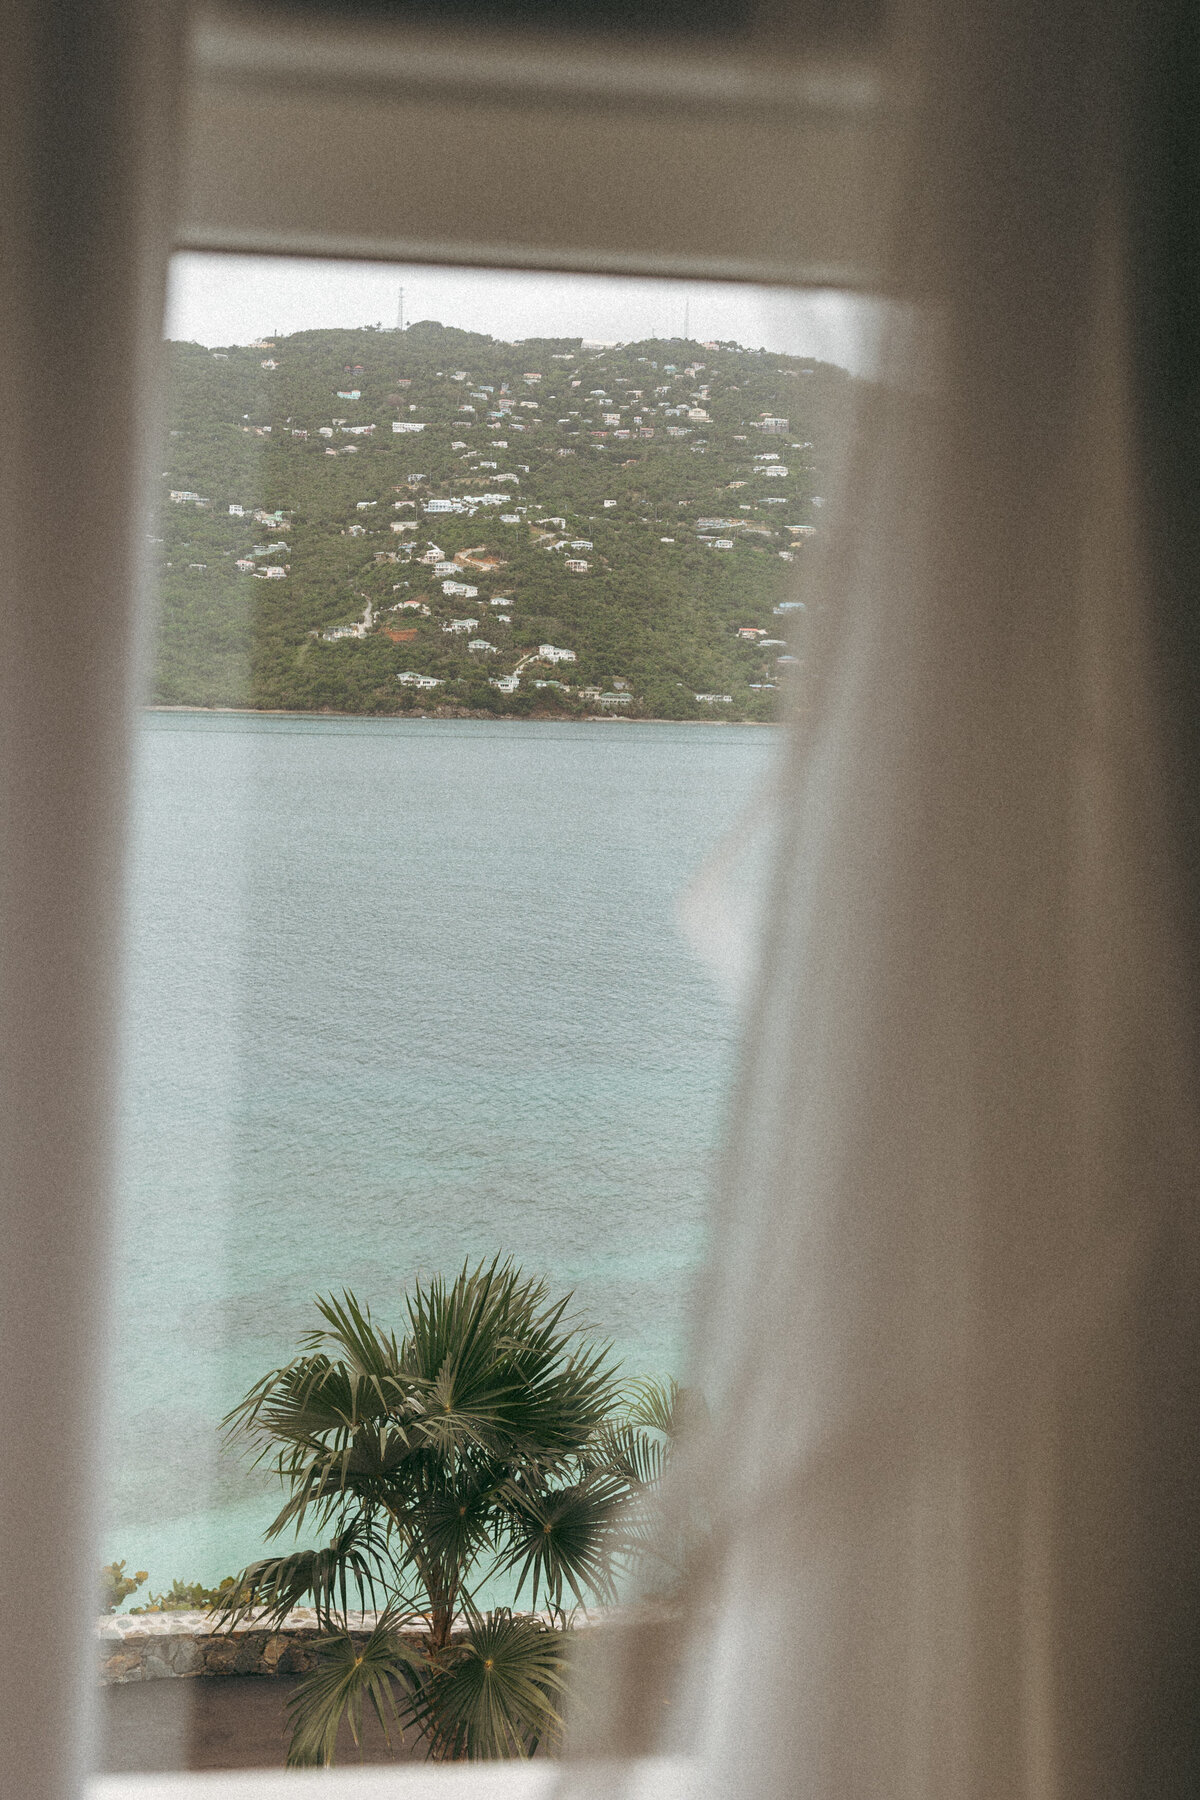 A serene view of a hilly island landscape and palm tree framed by a window with sheer curtains